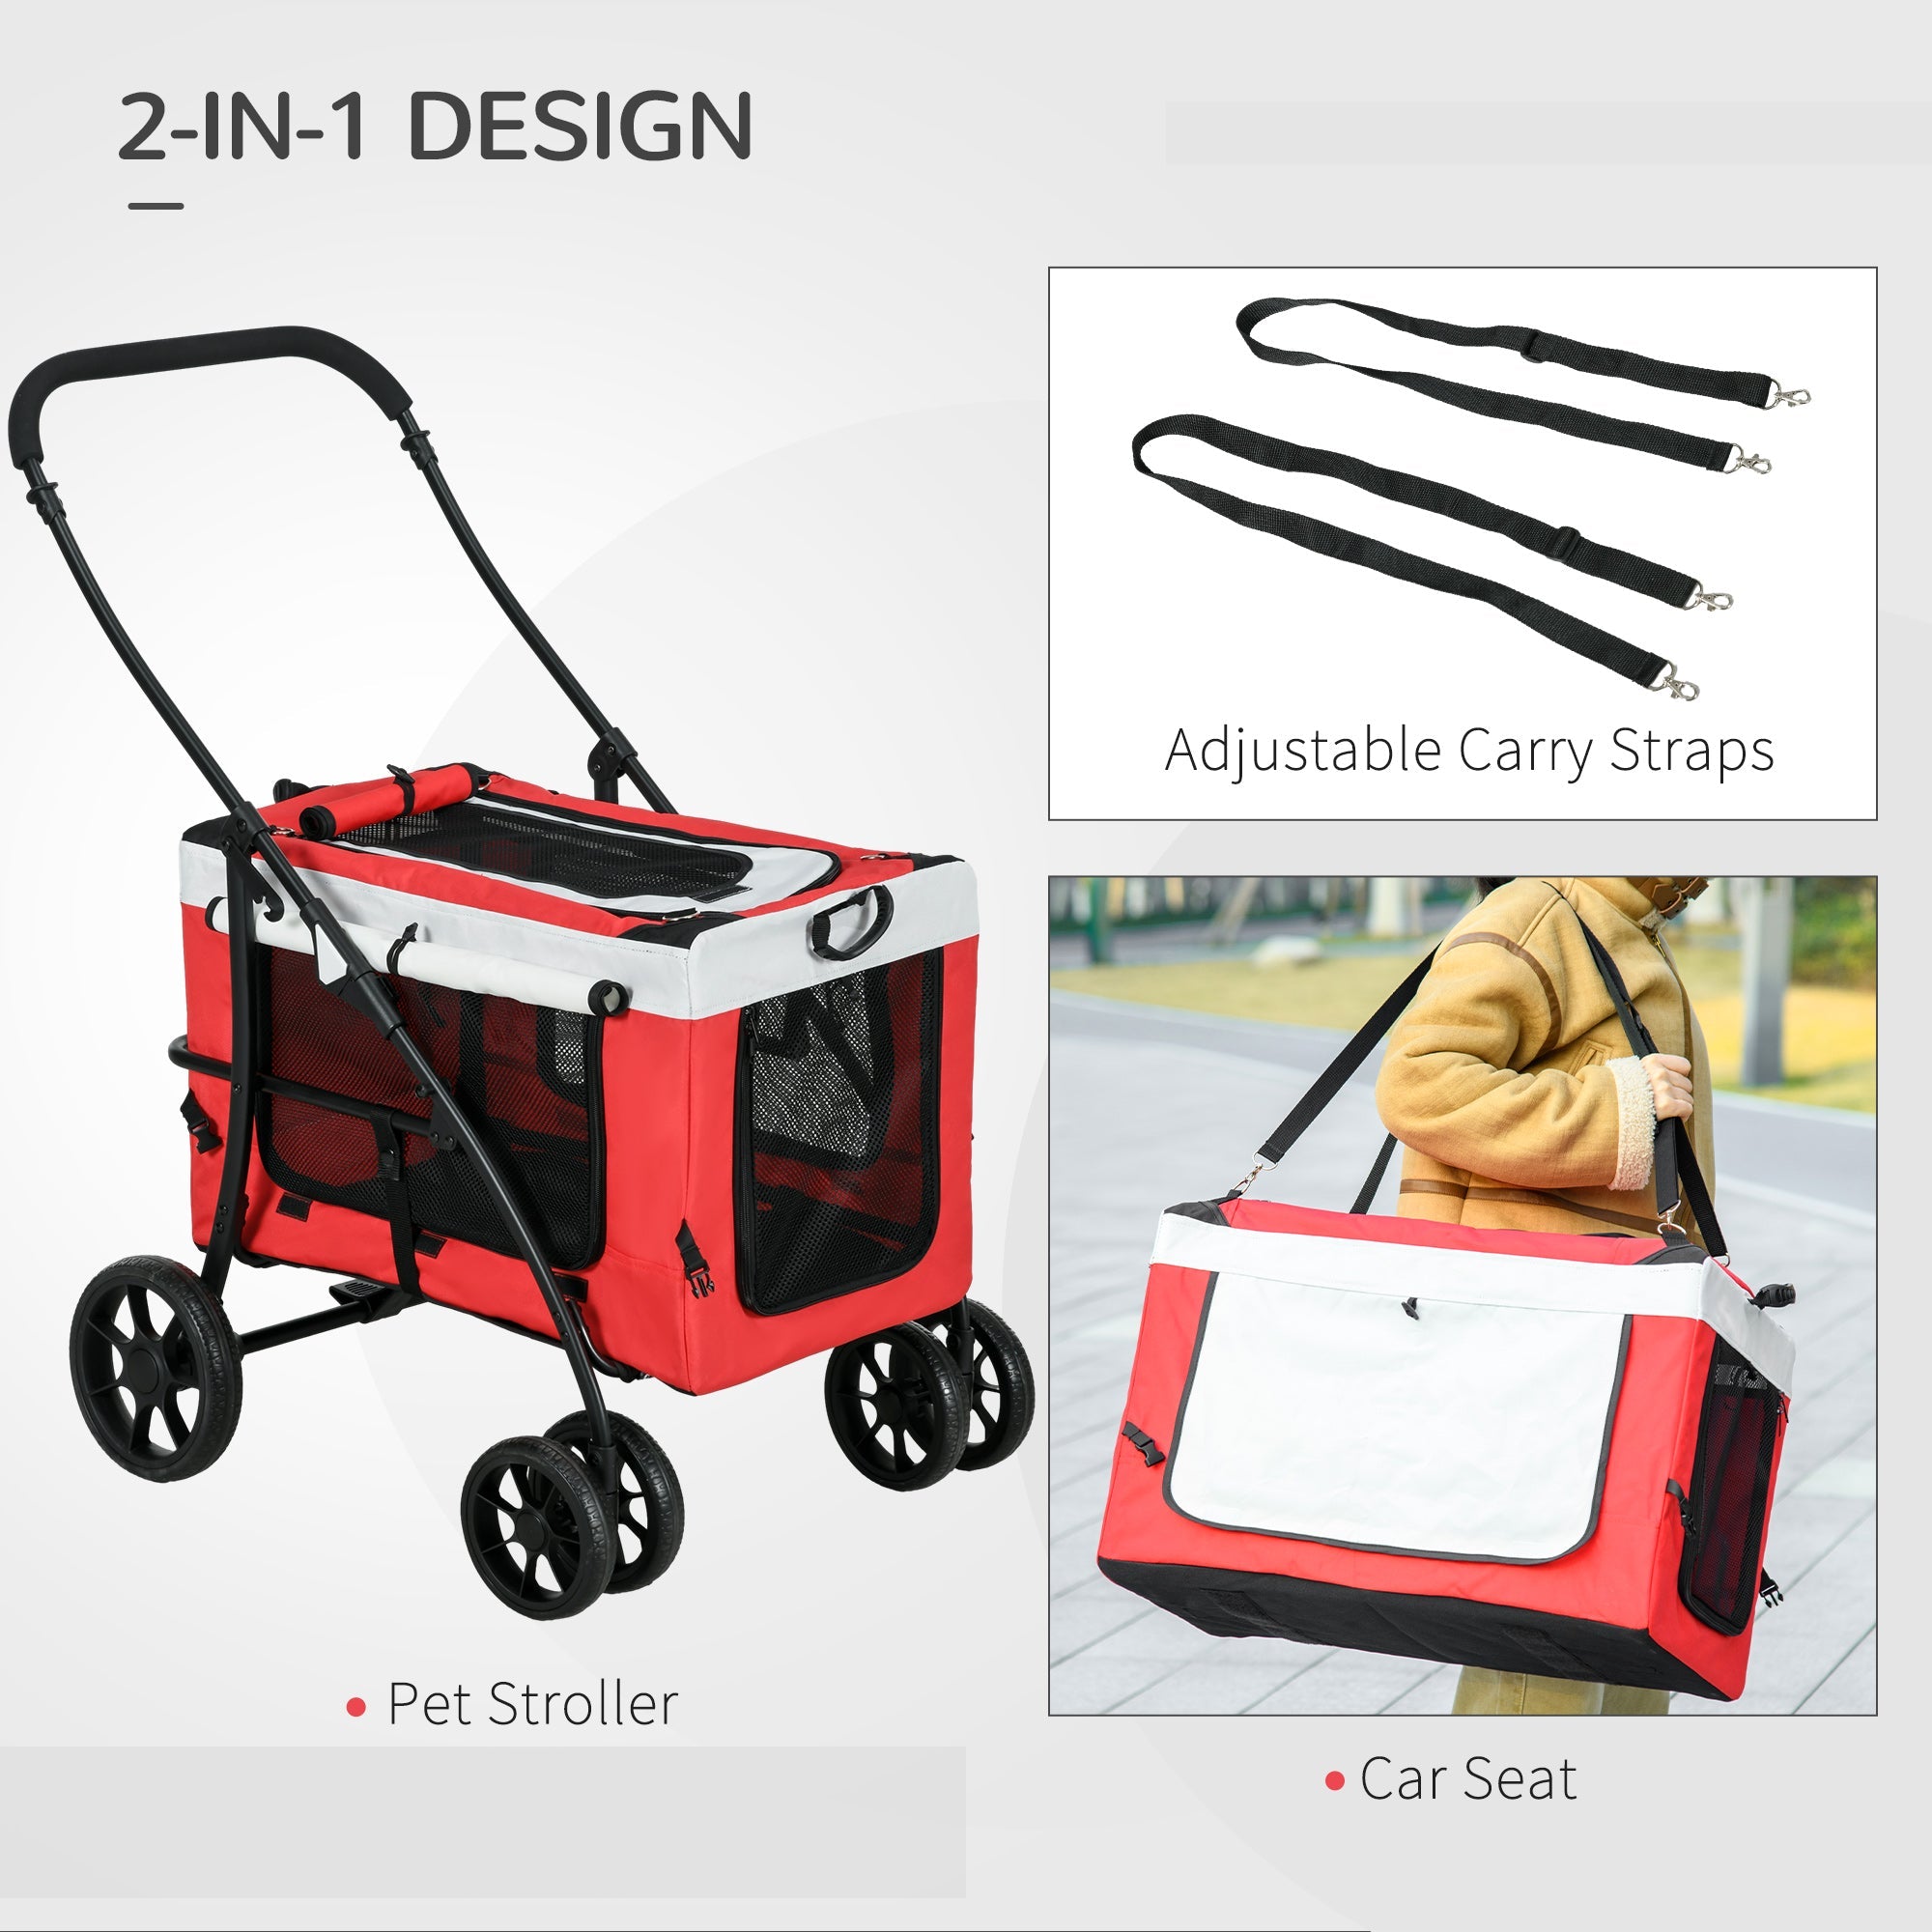 Foldable Dog Stroller, Pet Travel Crate, with Detachable Carrier, Soft Padding, for Mini, Small Dogs - Red-4